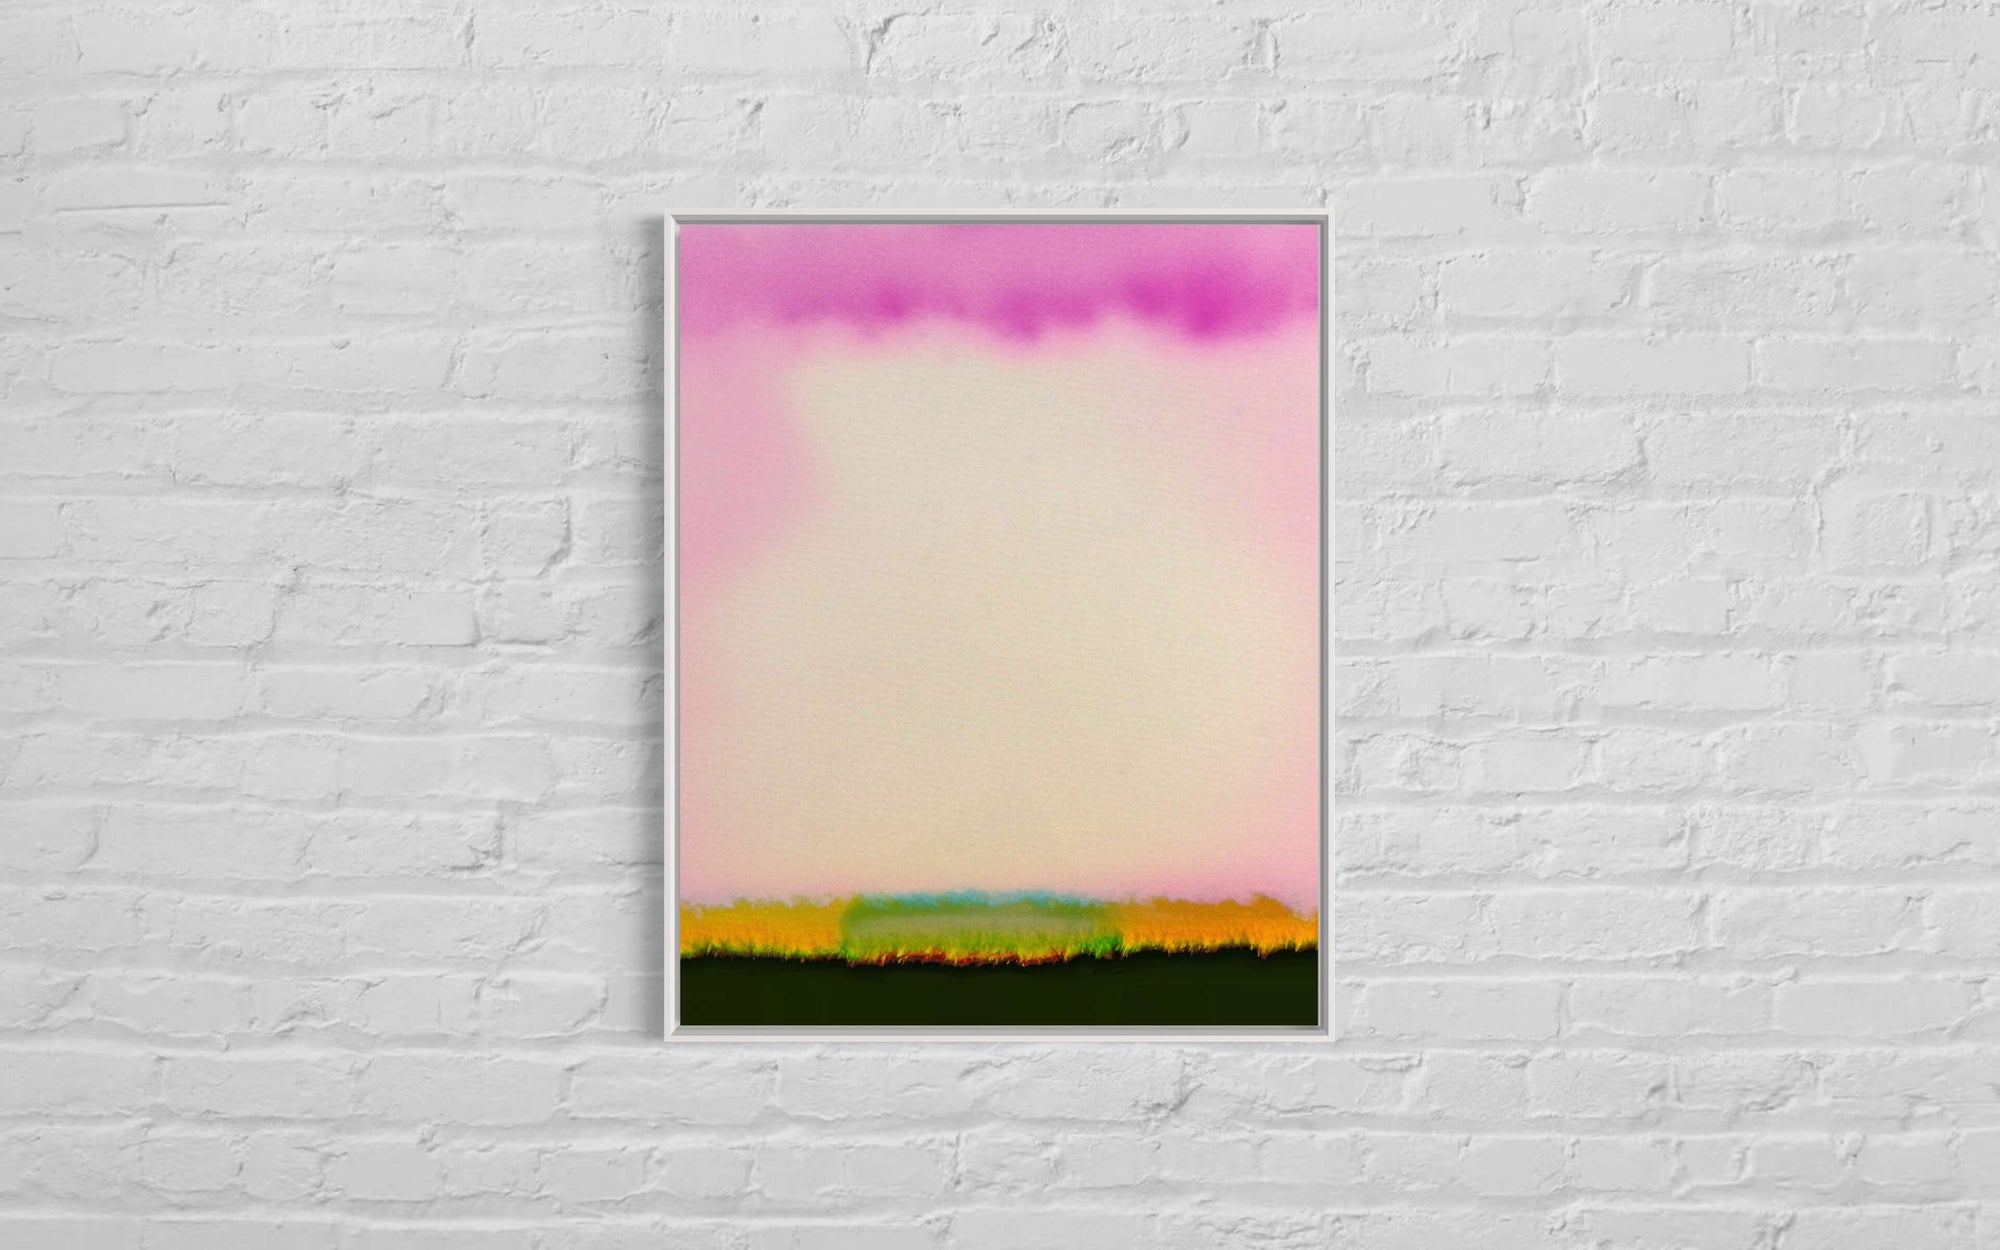 The image shows "Heavy Cloud I," a piece with a pink cloud atop and a hint of bright colours at the bottom, set against a white brick wall. The artwork radiates a calm, thoughtful vibe.